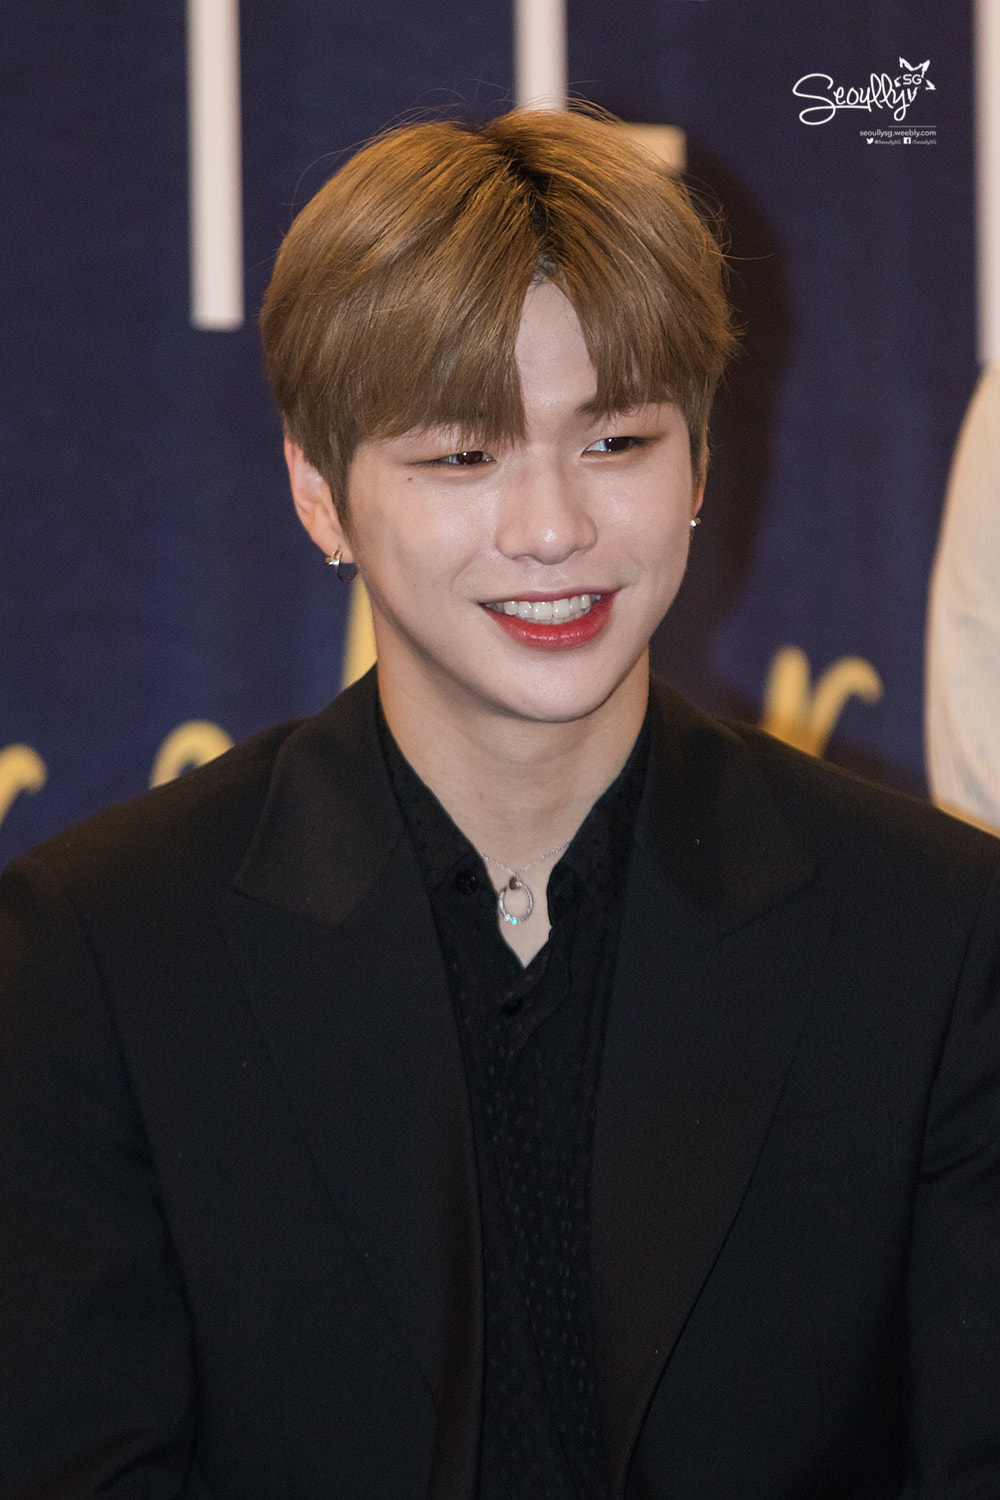 Kang Daniel COLOR ON ME Press Conference - SeoullySG